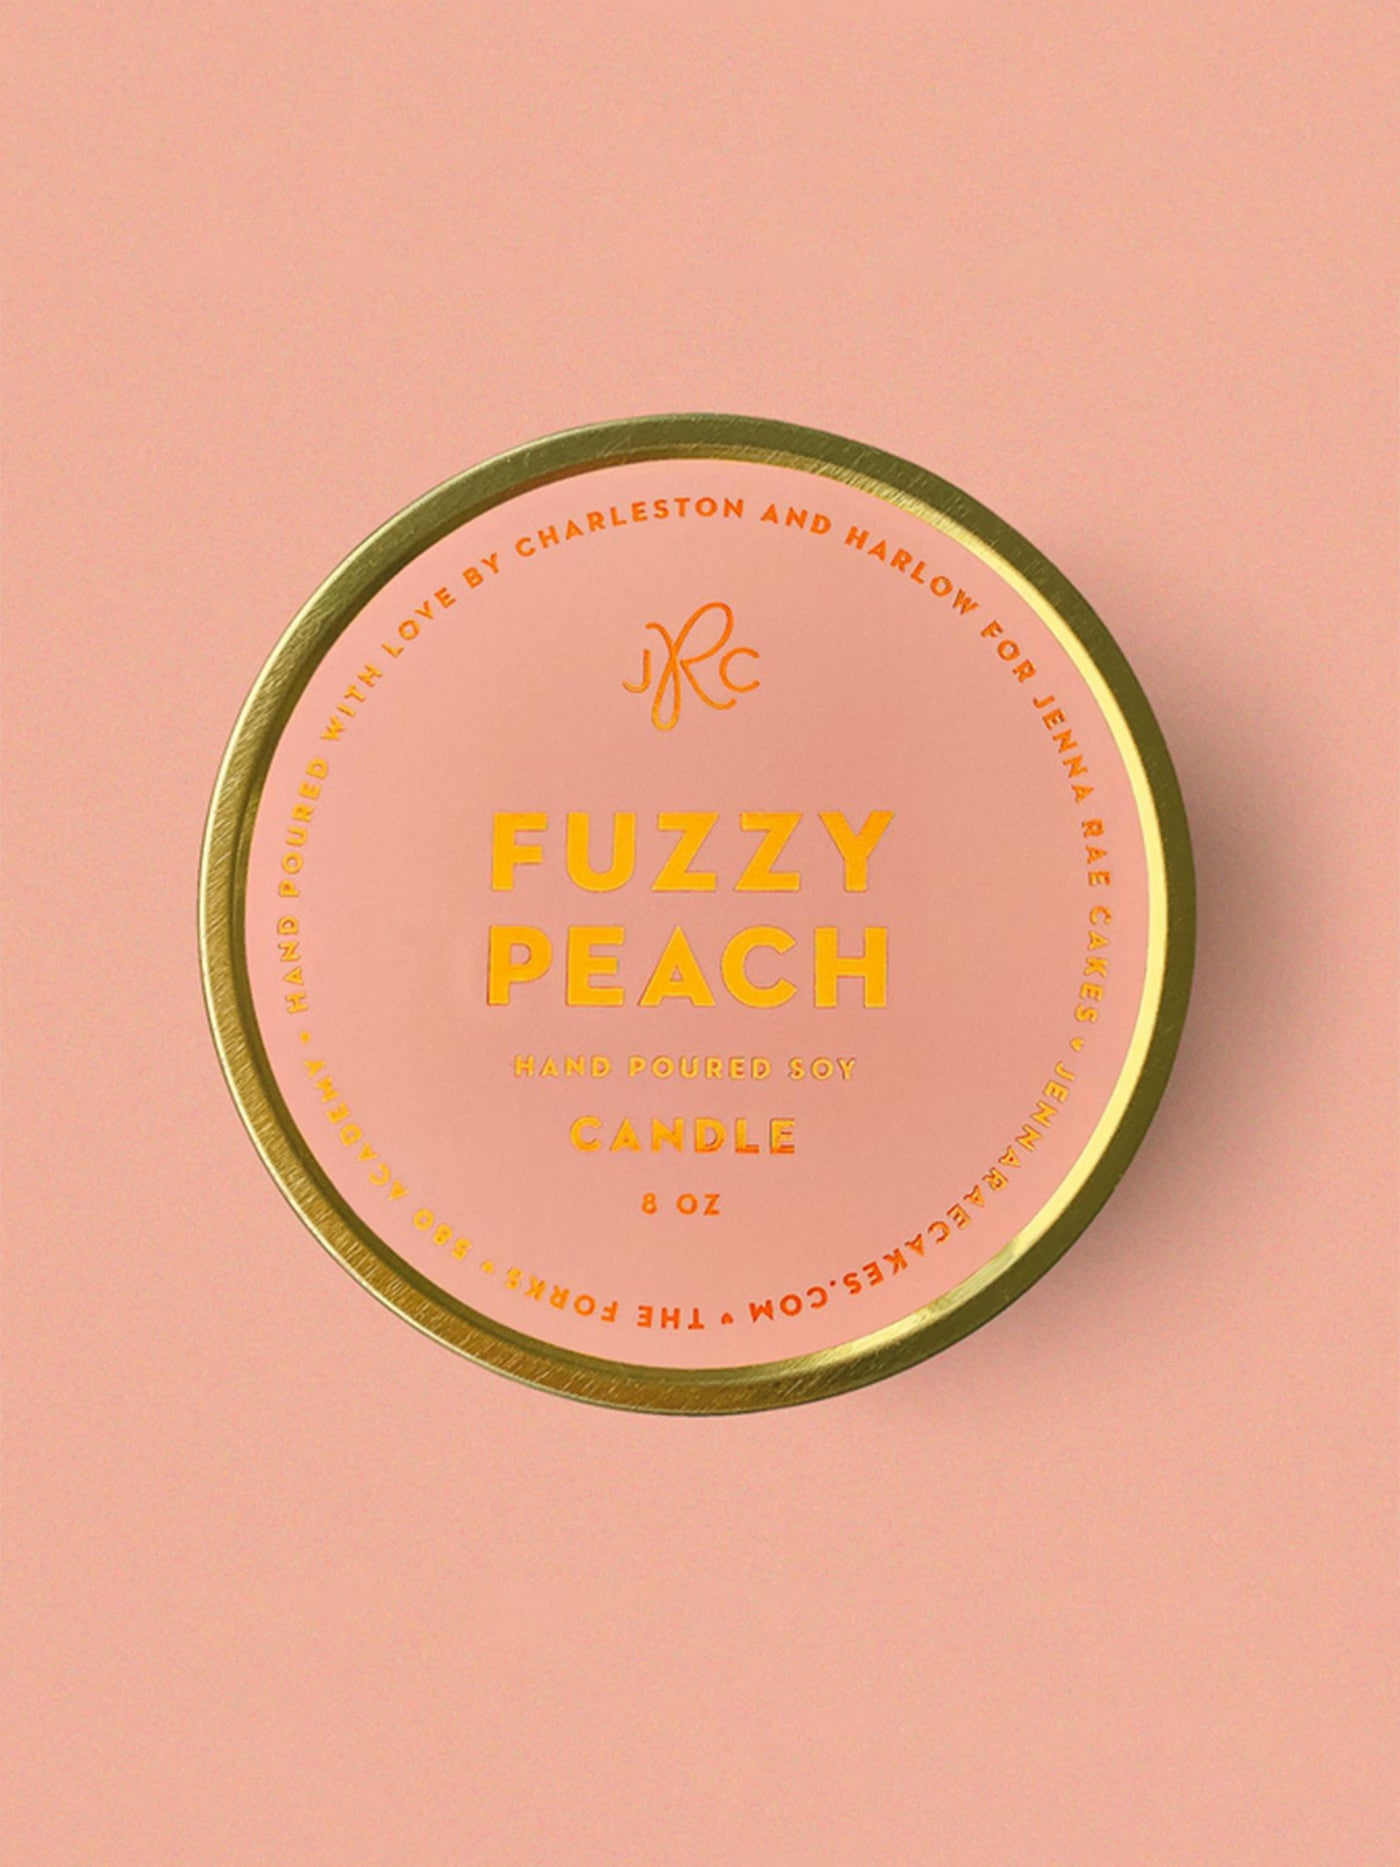 Fuzzy Peach Soy Travel Candle